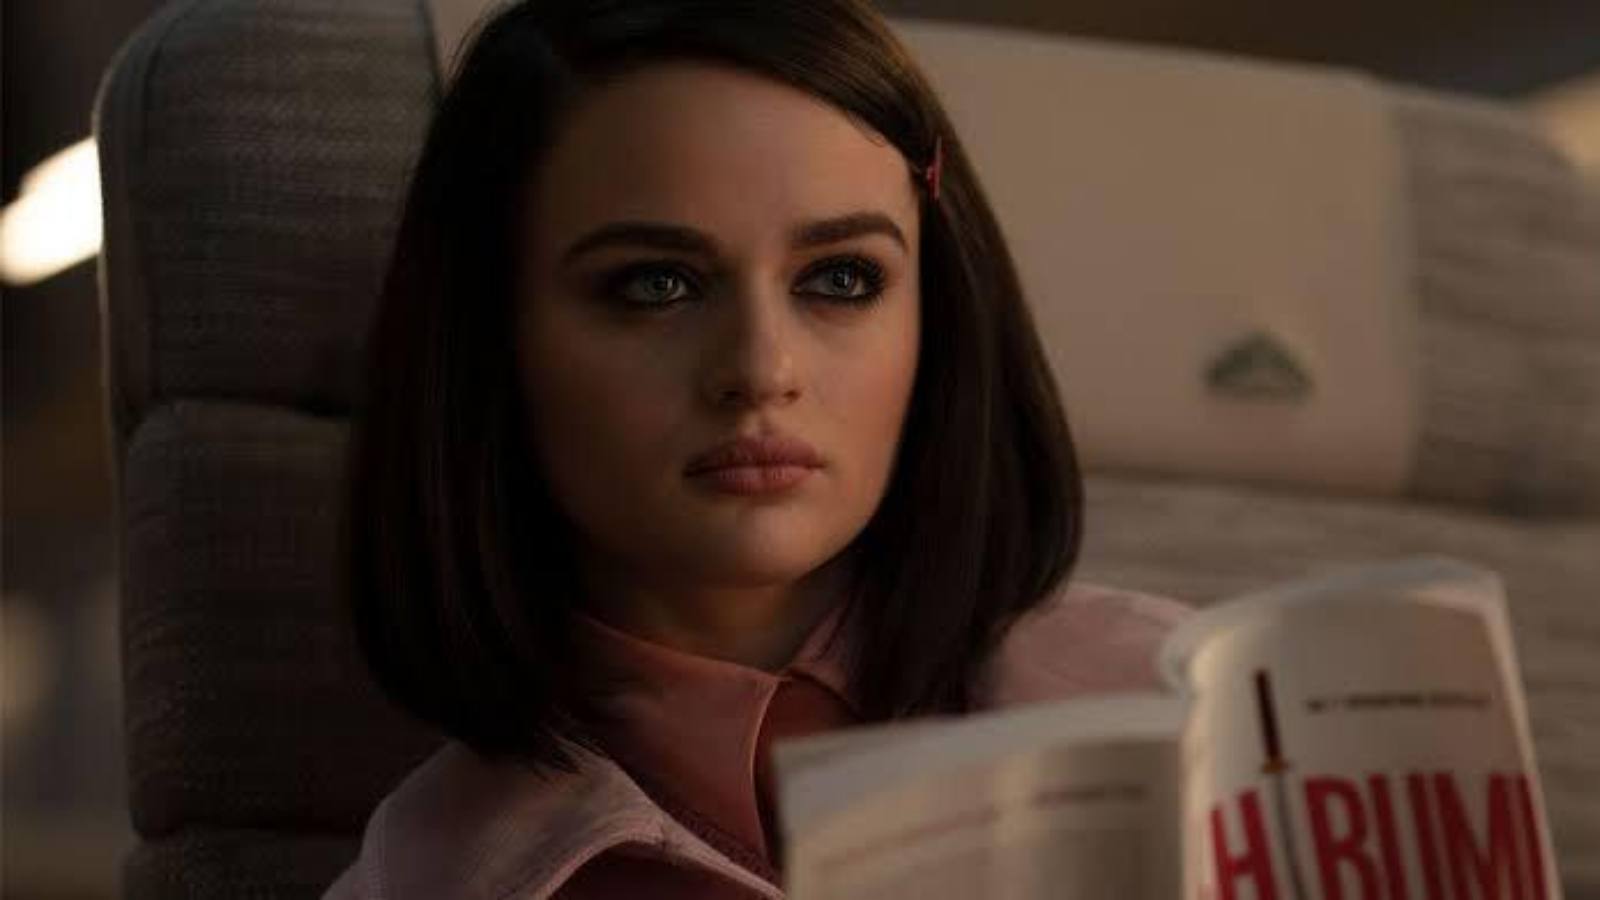 Joey King relates to her 'sociopath' character, Prince in 'Bullet Train'